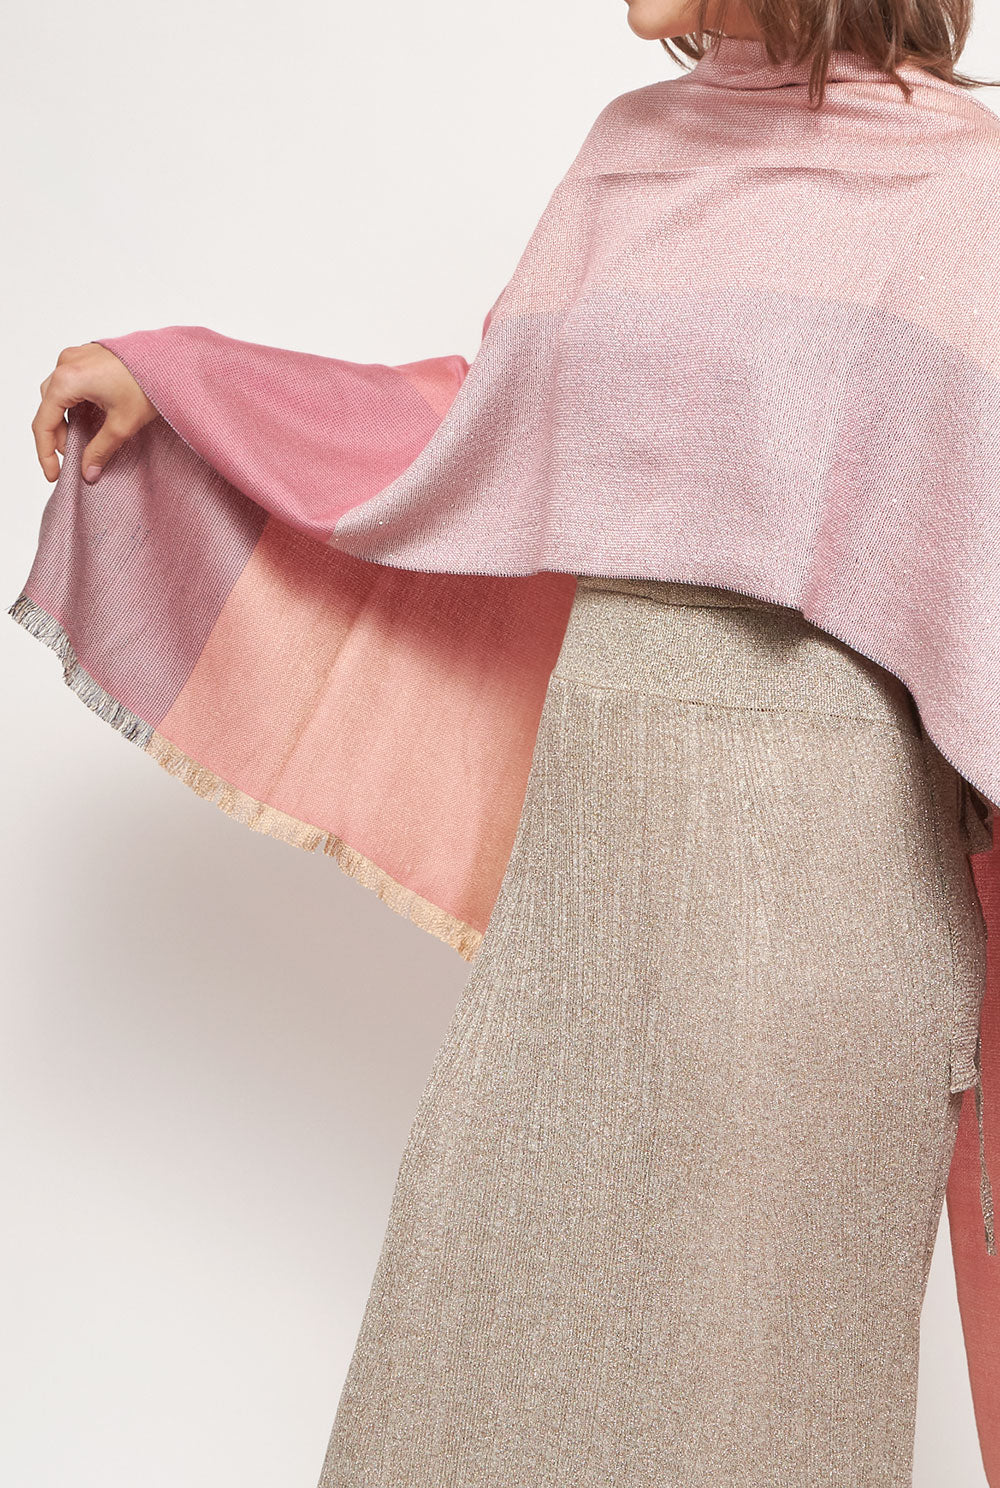 Cashmere and Silk Shawl in pink with sequins scarve Victoria de Talhora 